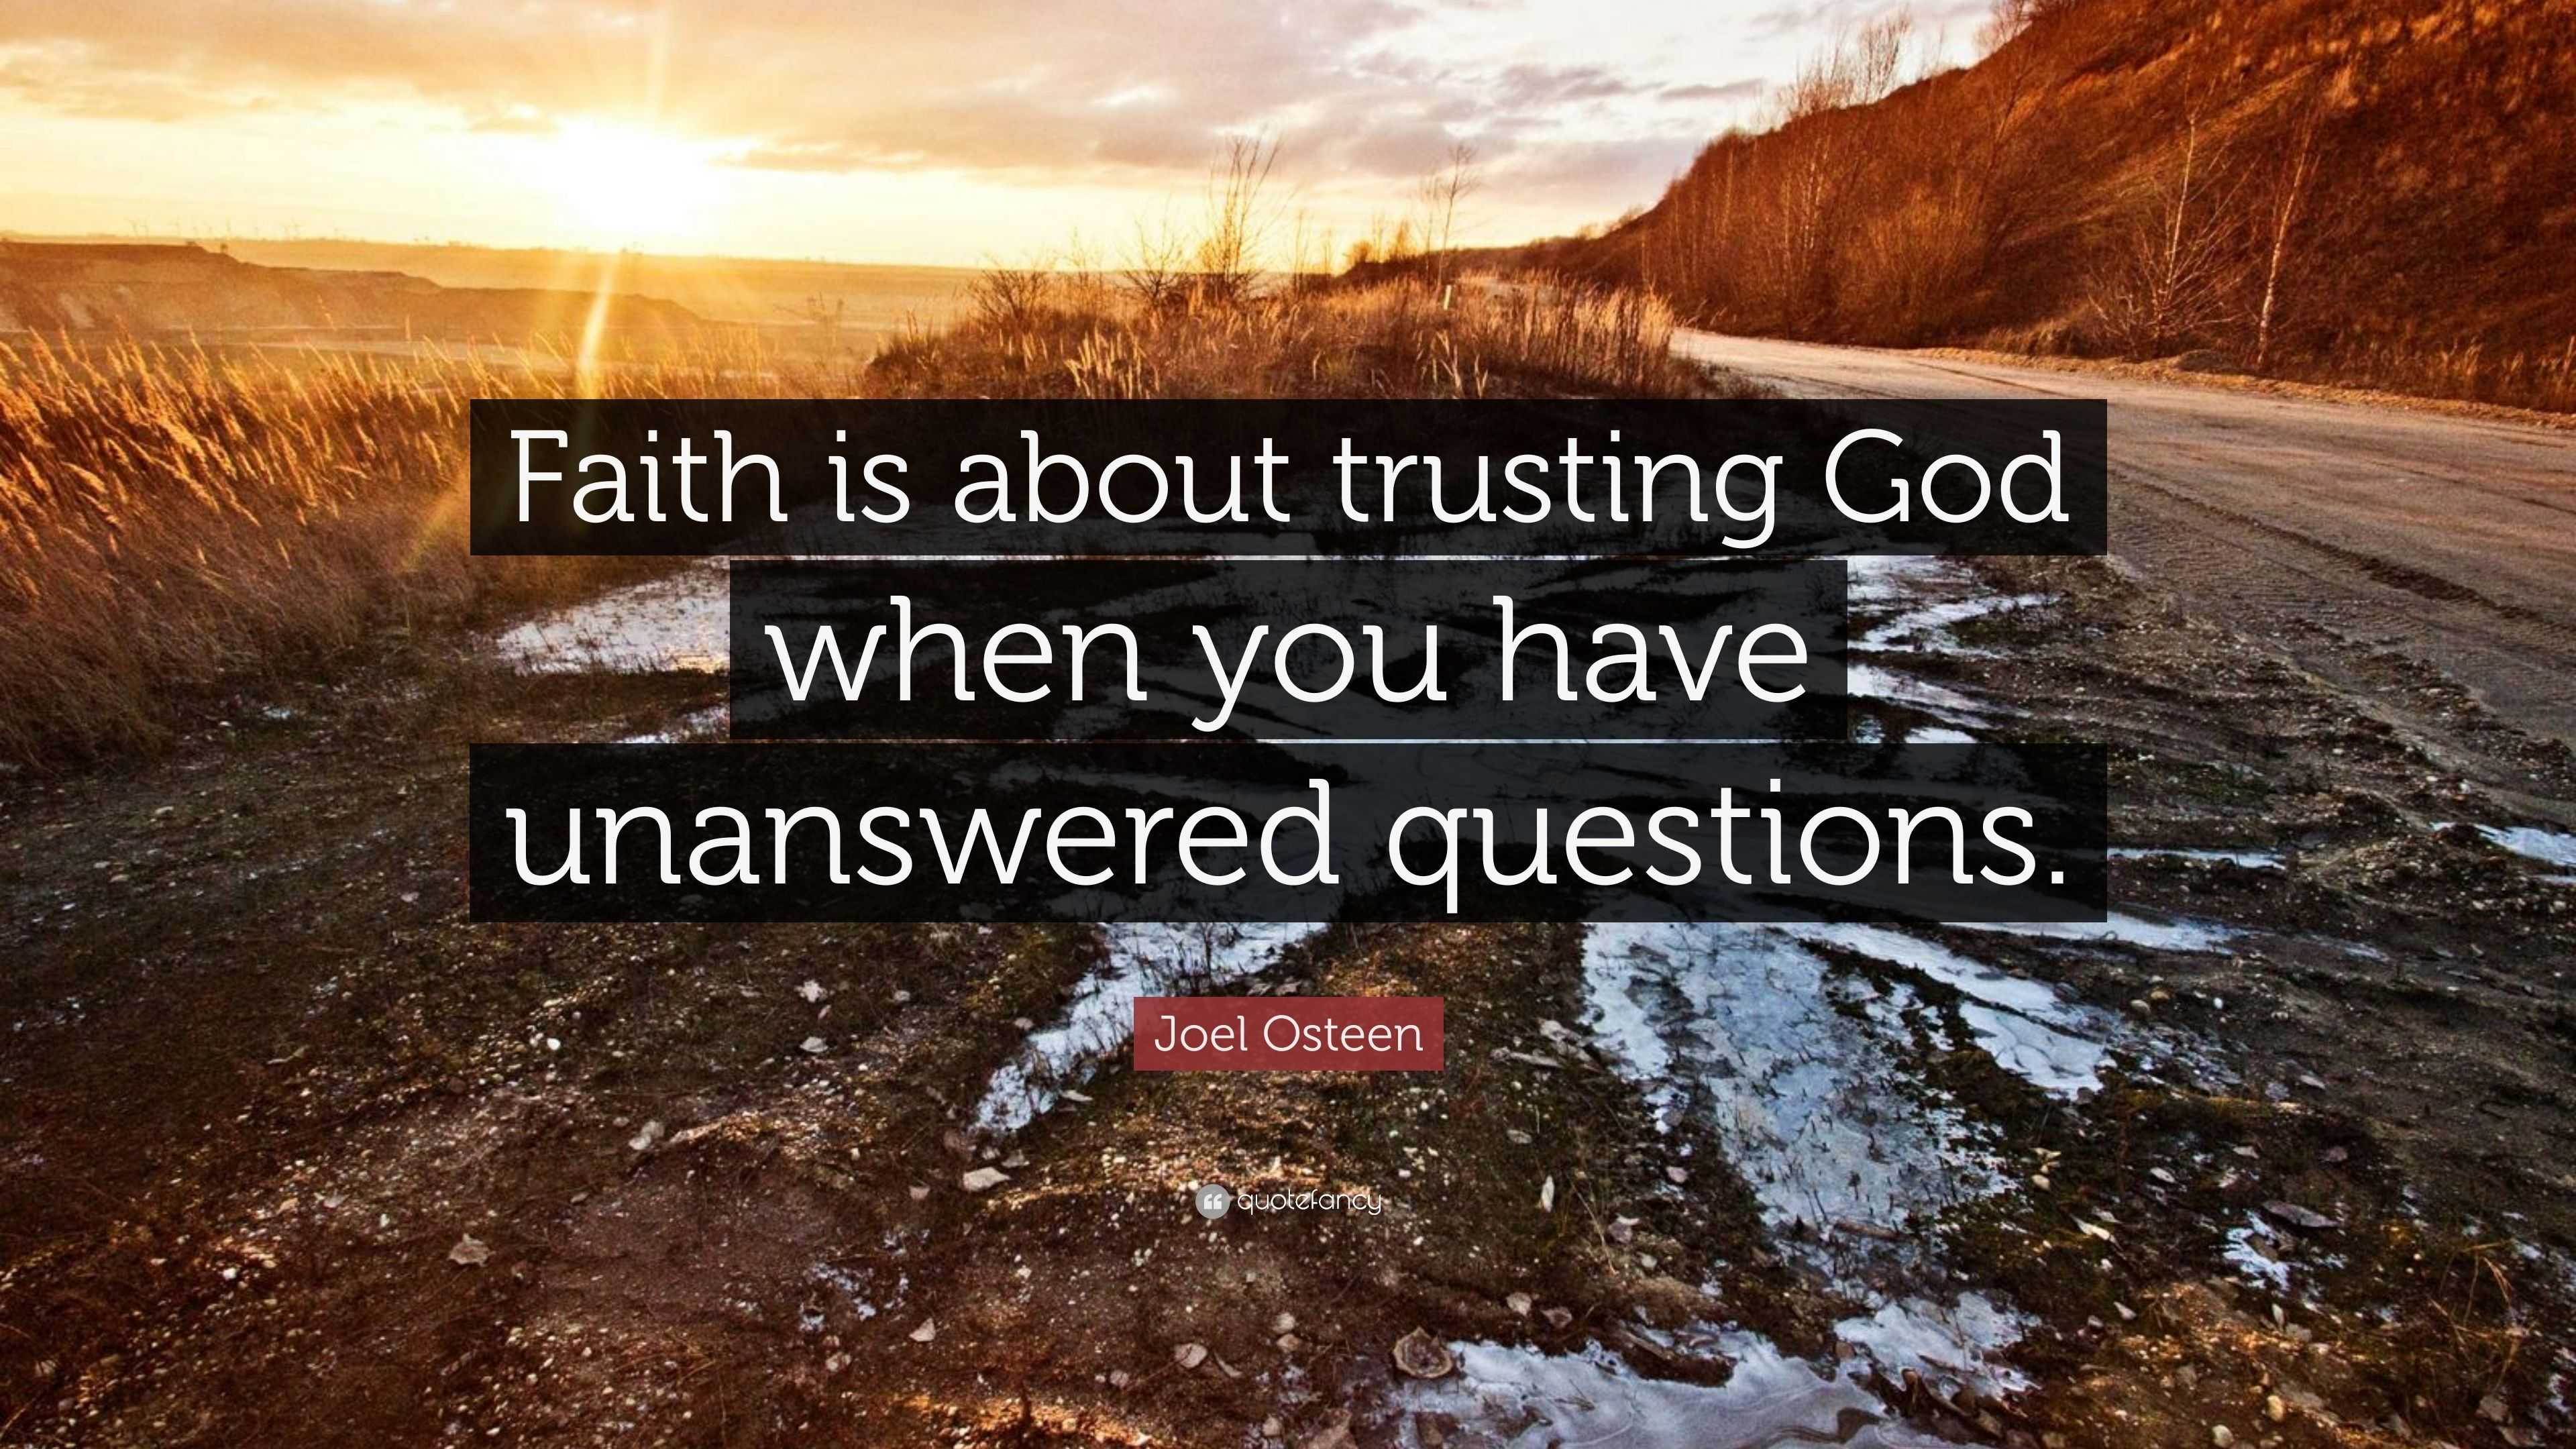 Joel Osteen Quote: "Faith is about trusting God when you have unanswered questions." (7 ...